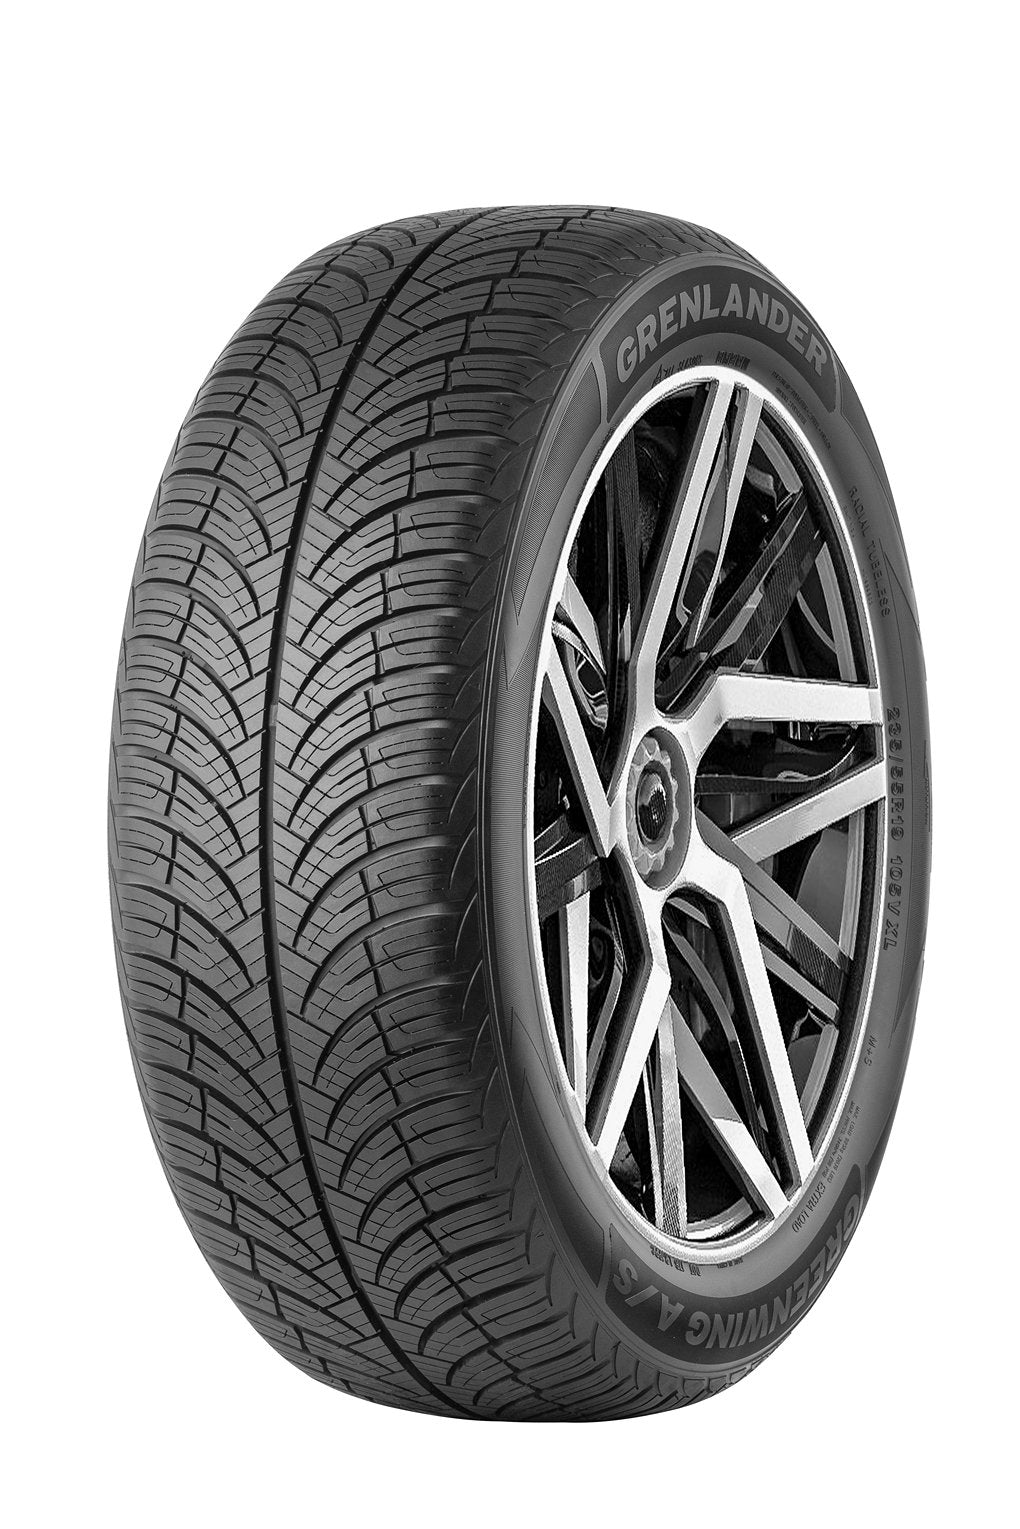 225/40R19 GRENLANDER FRONWING A/S ALL WEATHER - Toee Tire